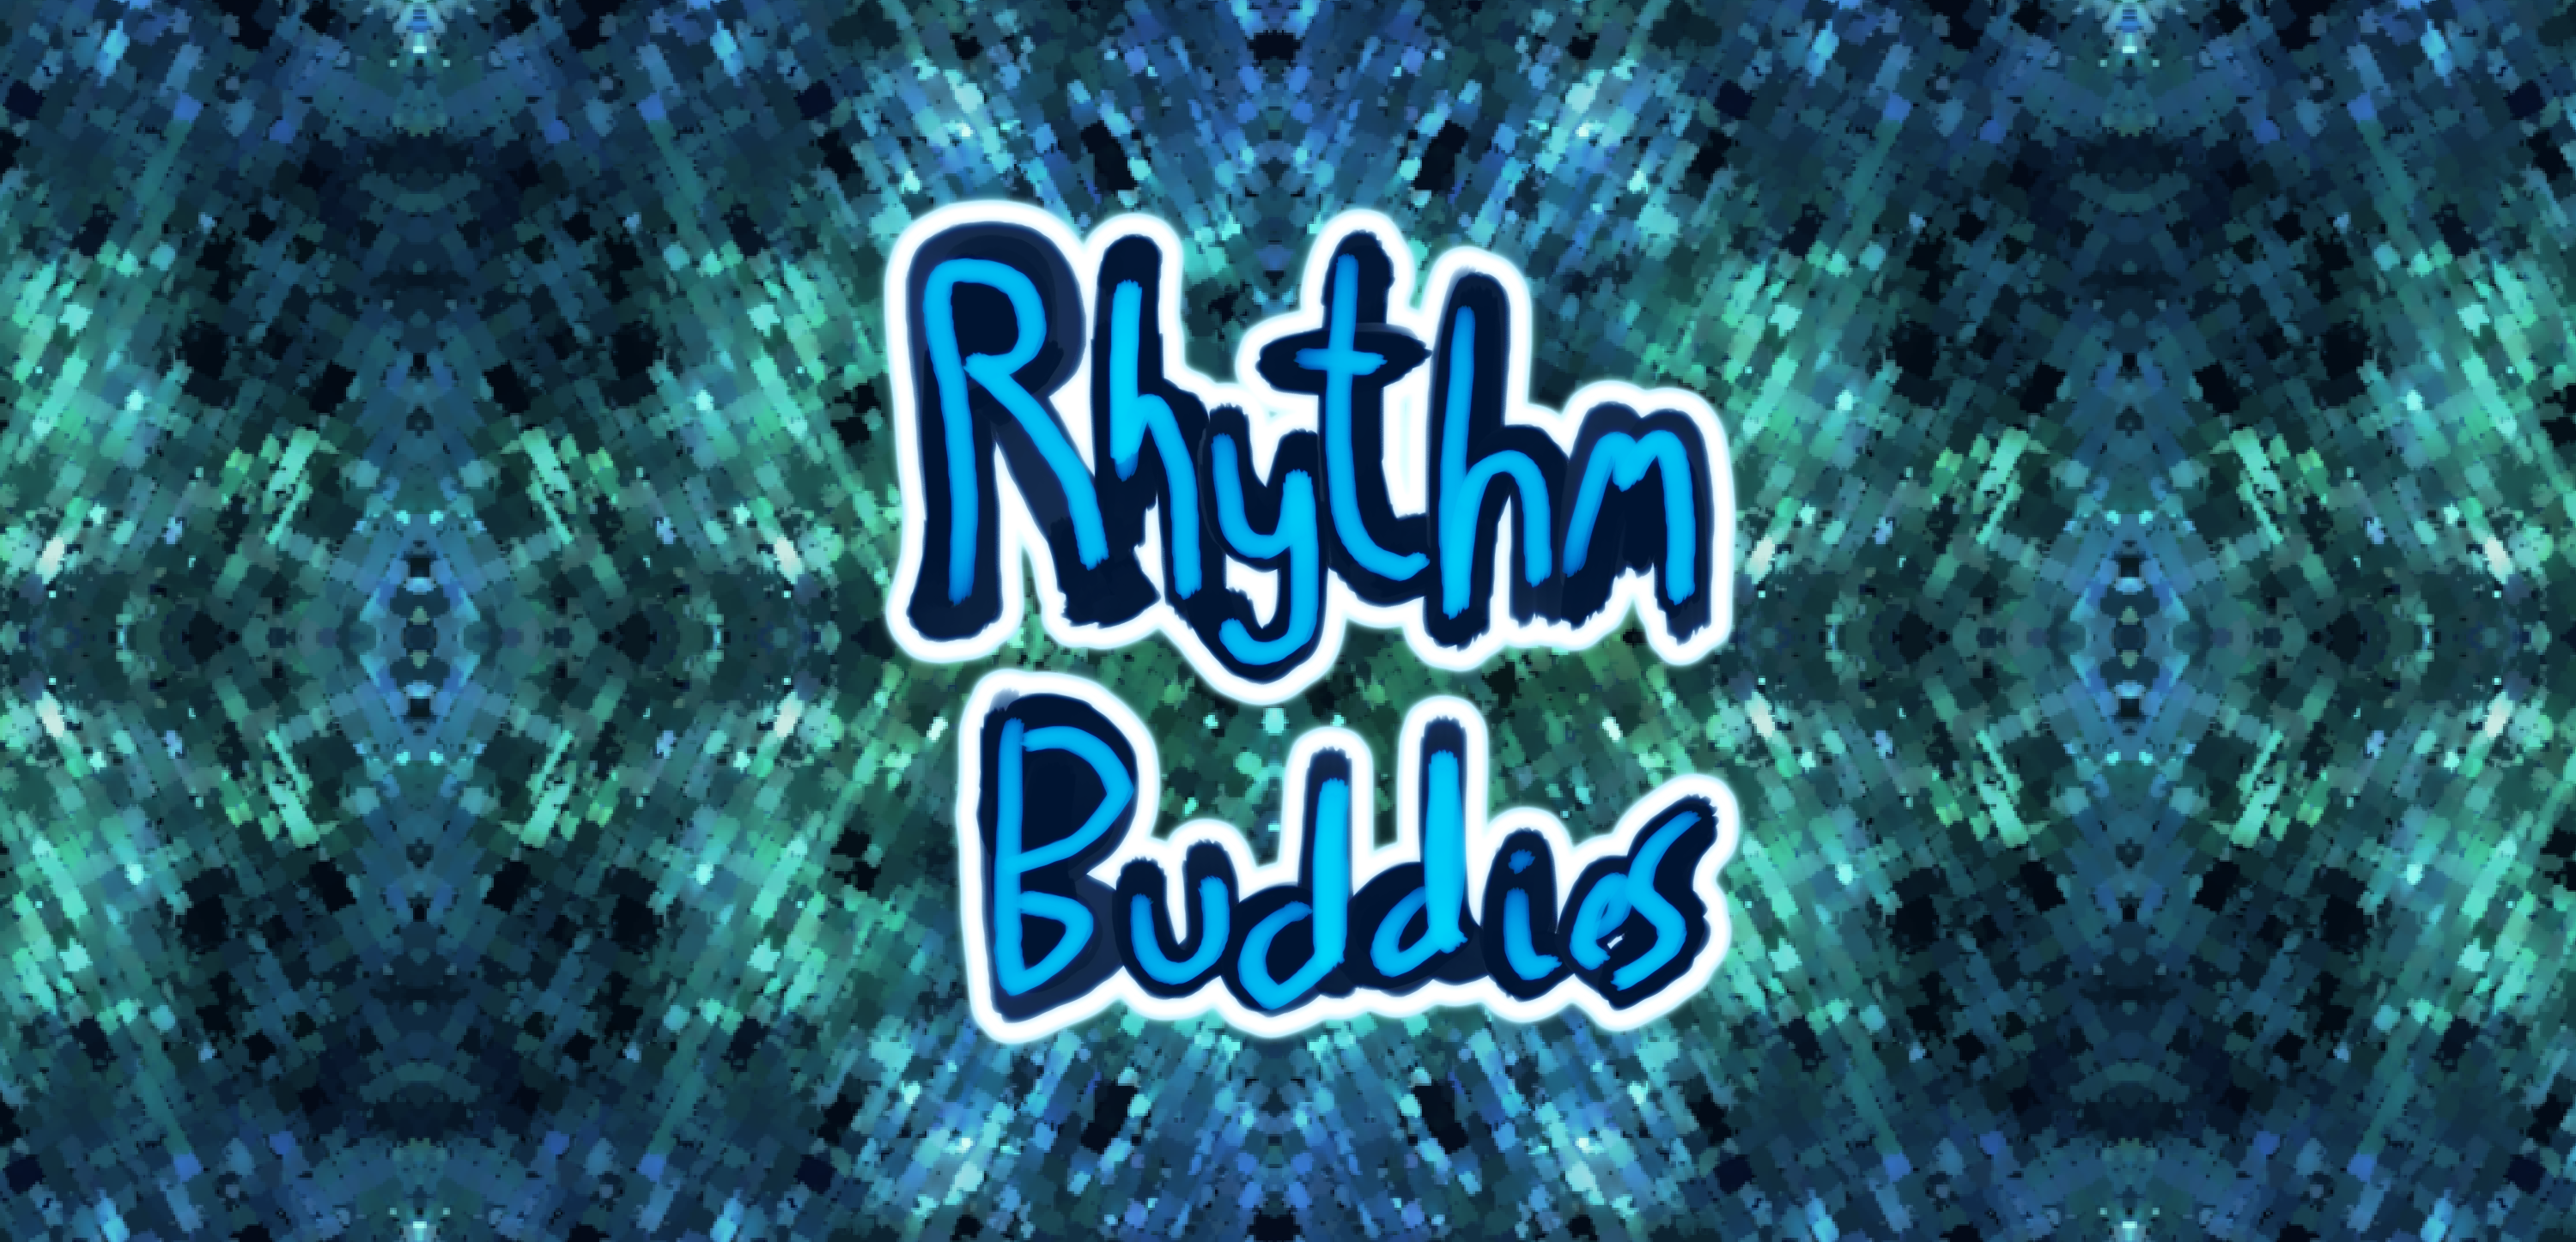 Rhythm Buddies (Very unfinished but i decided to post it anyway because i thought people might enjoy the funky music)